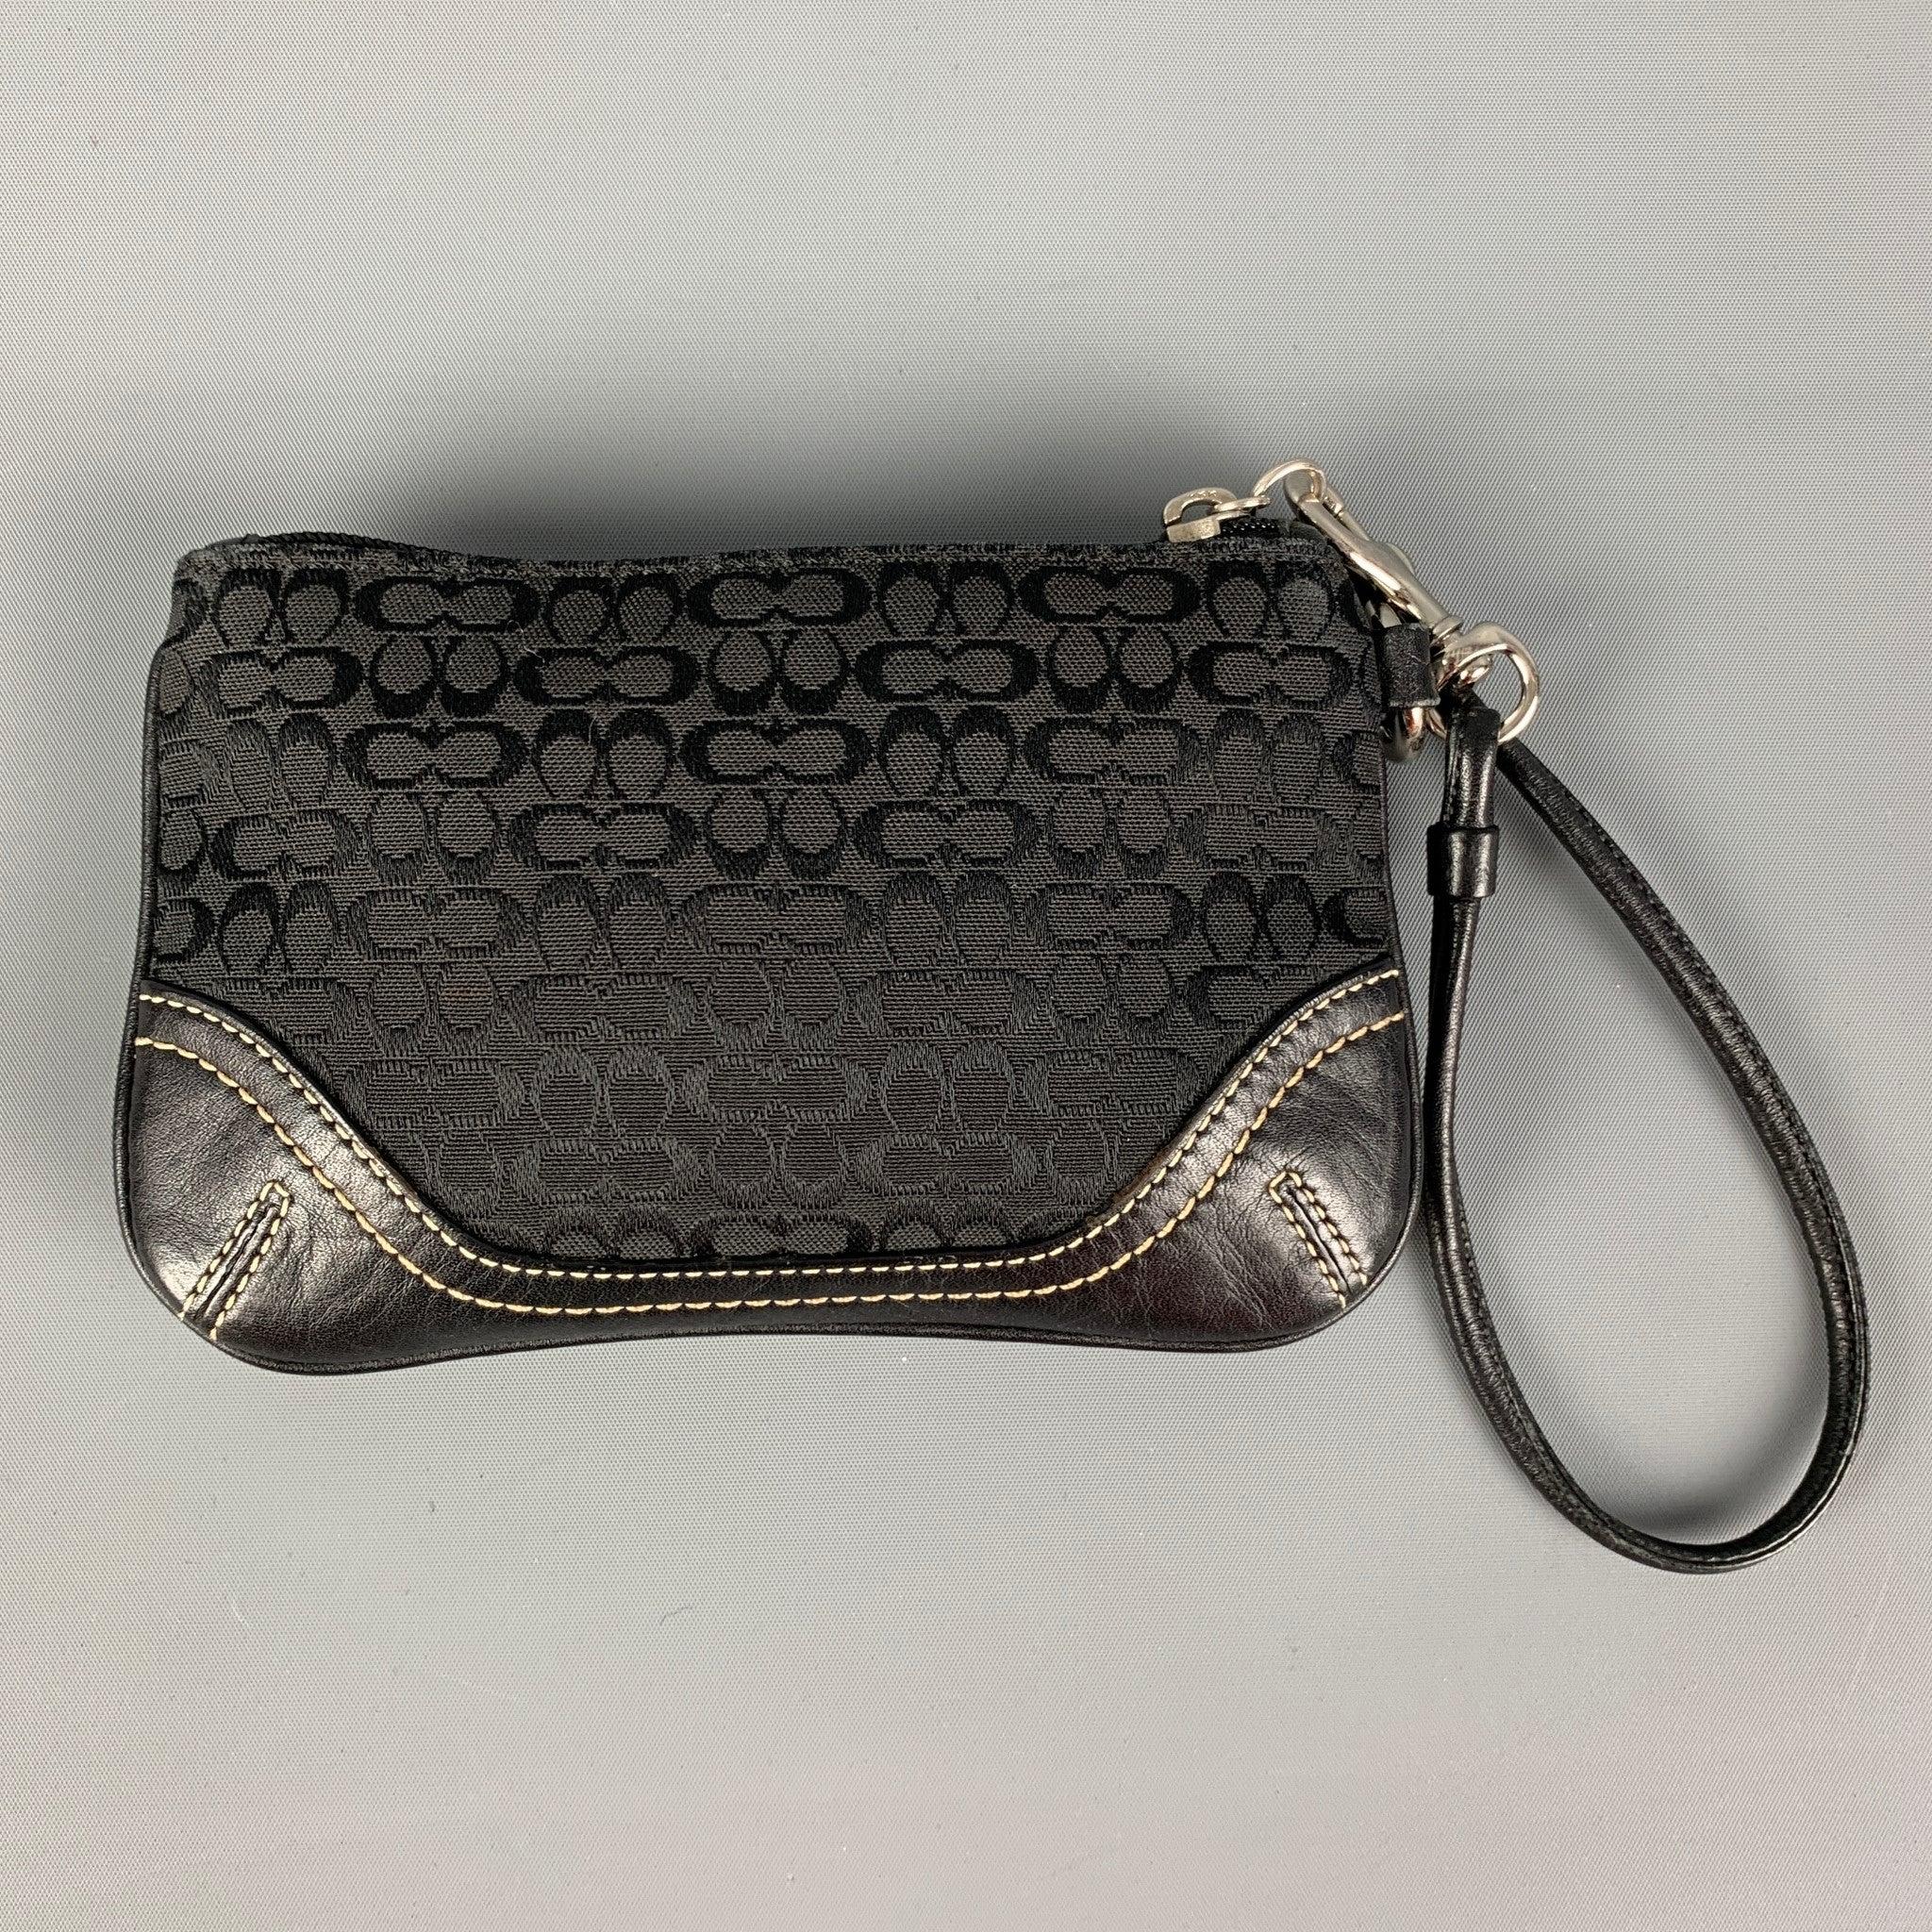 COACH Black Contrast Stitch Nylon Leather Wristlet In Good Condition For Sale In San Francisco, CA